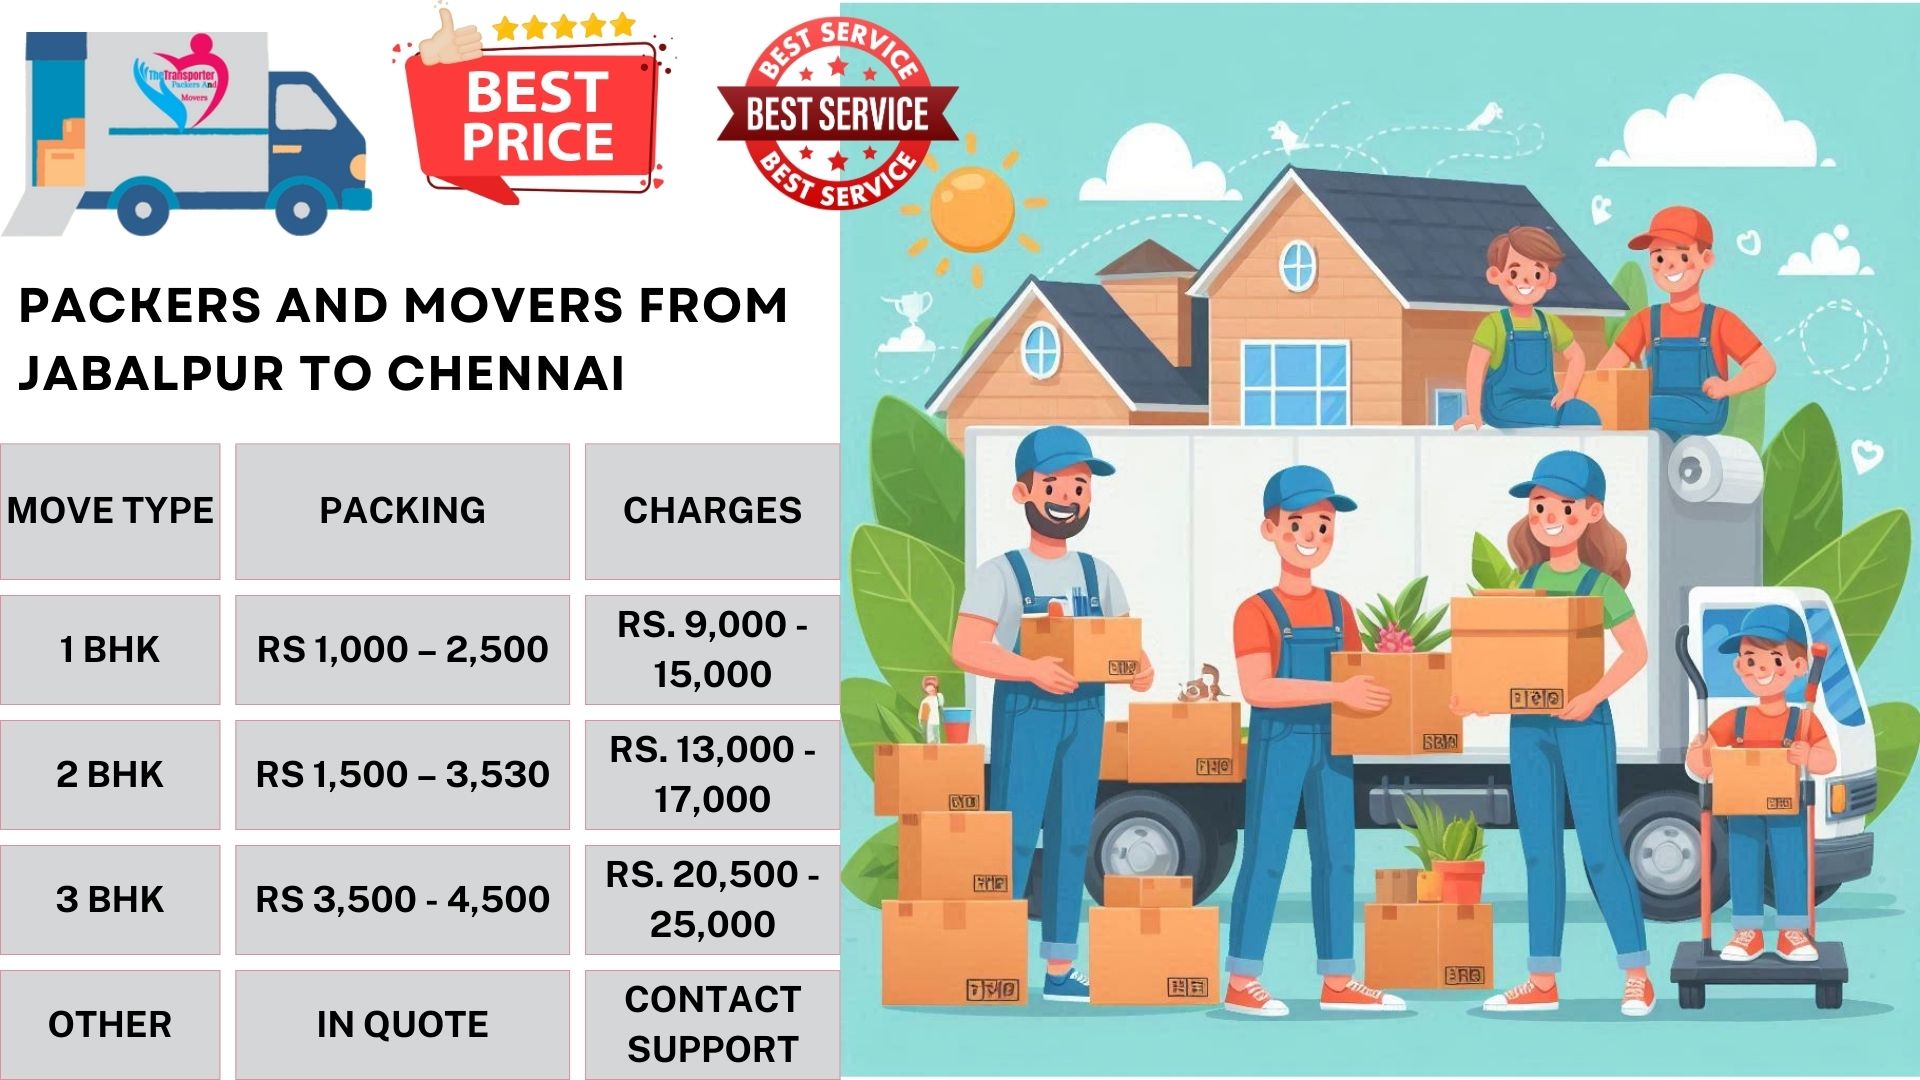 Your household goods shifting from Jabalpur to Chennai